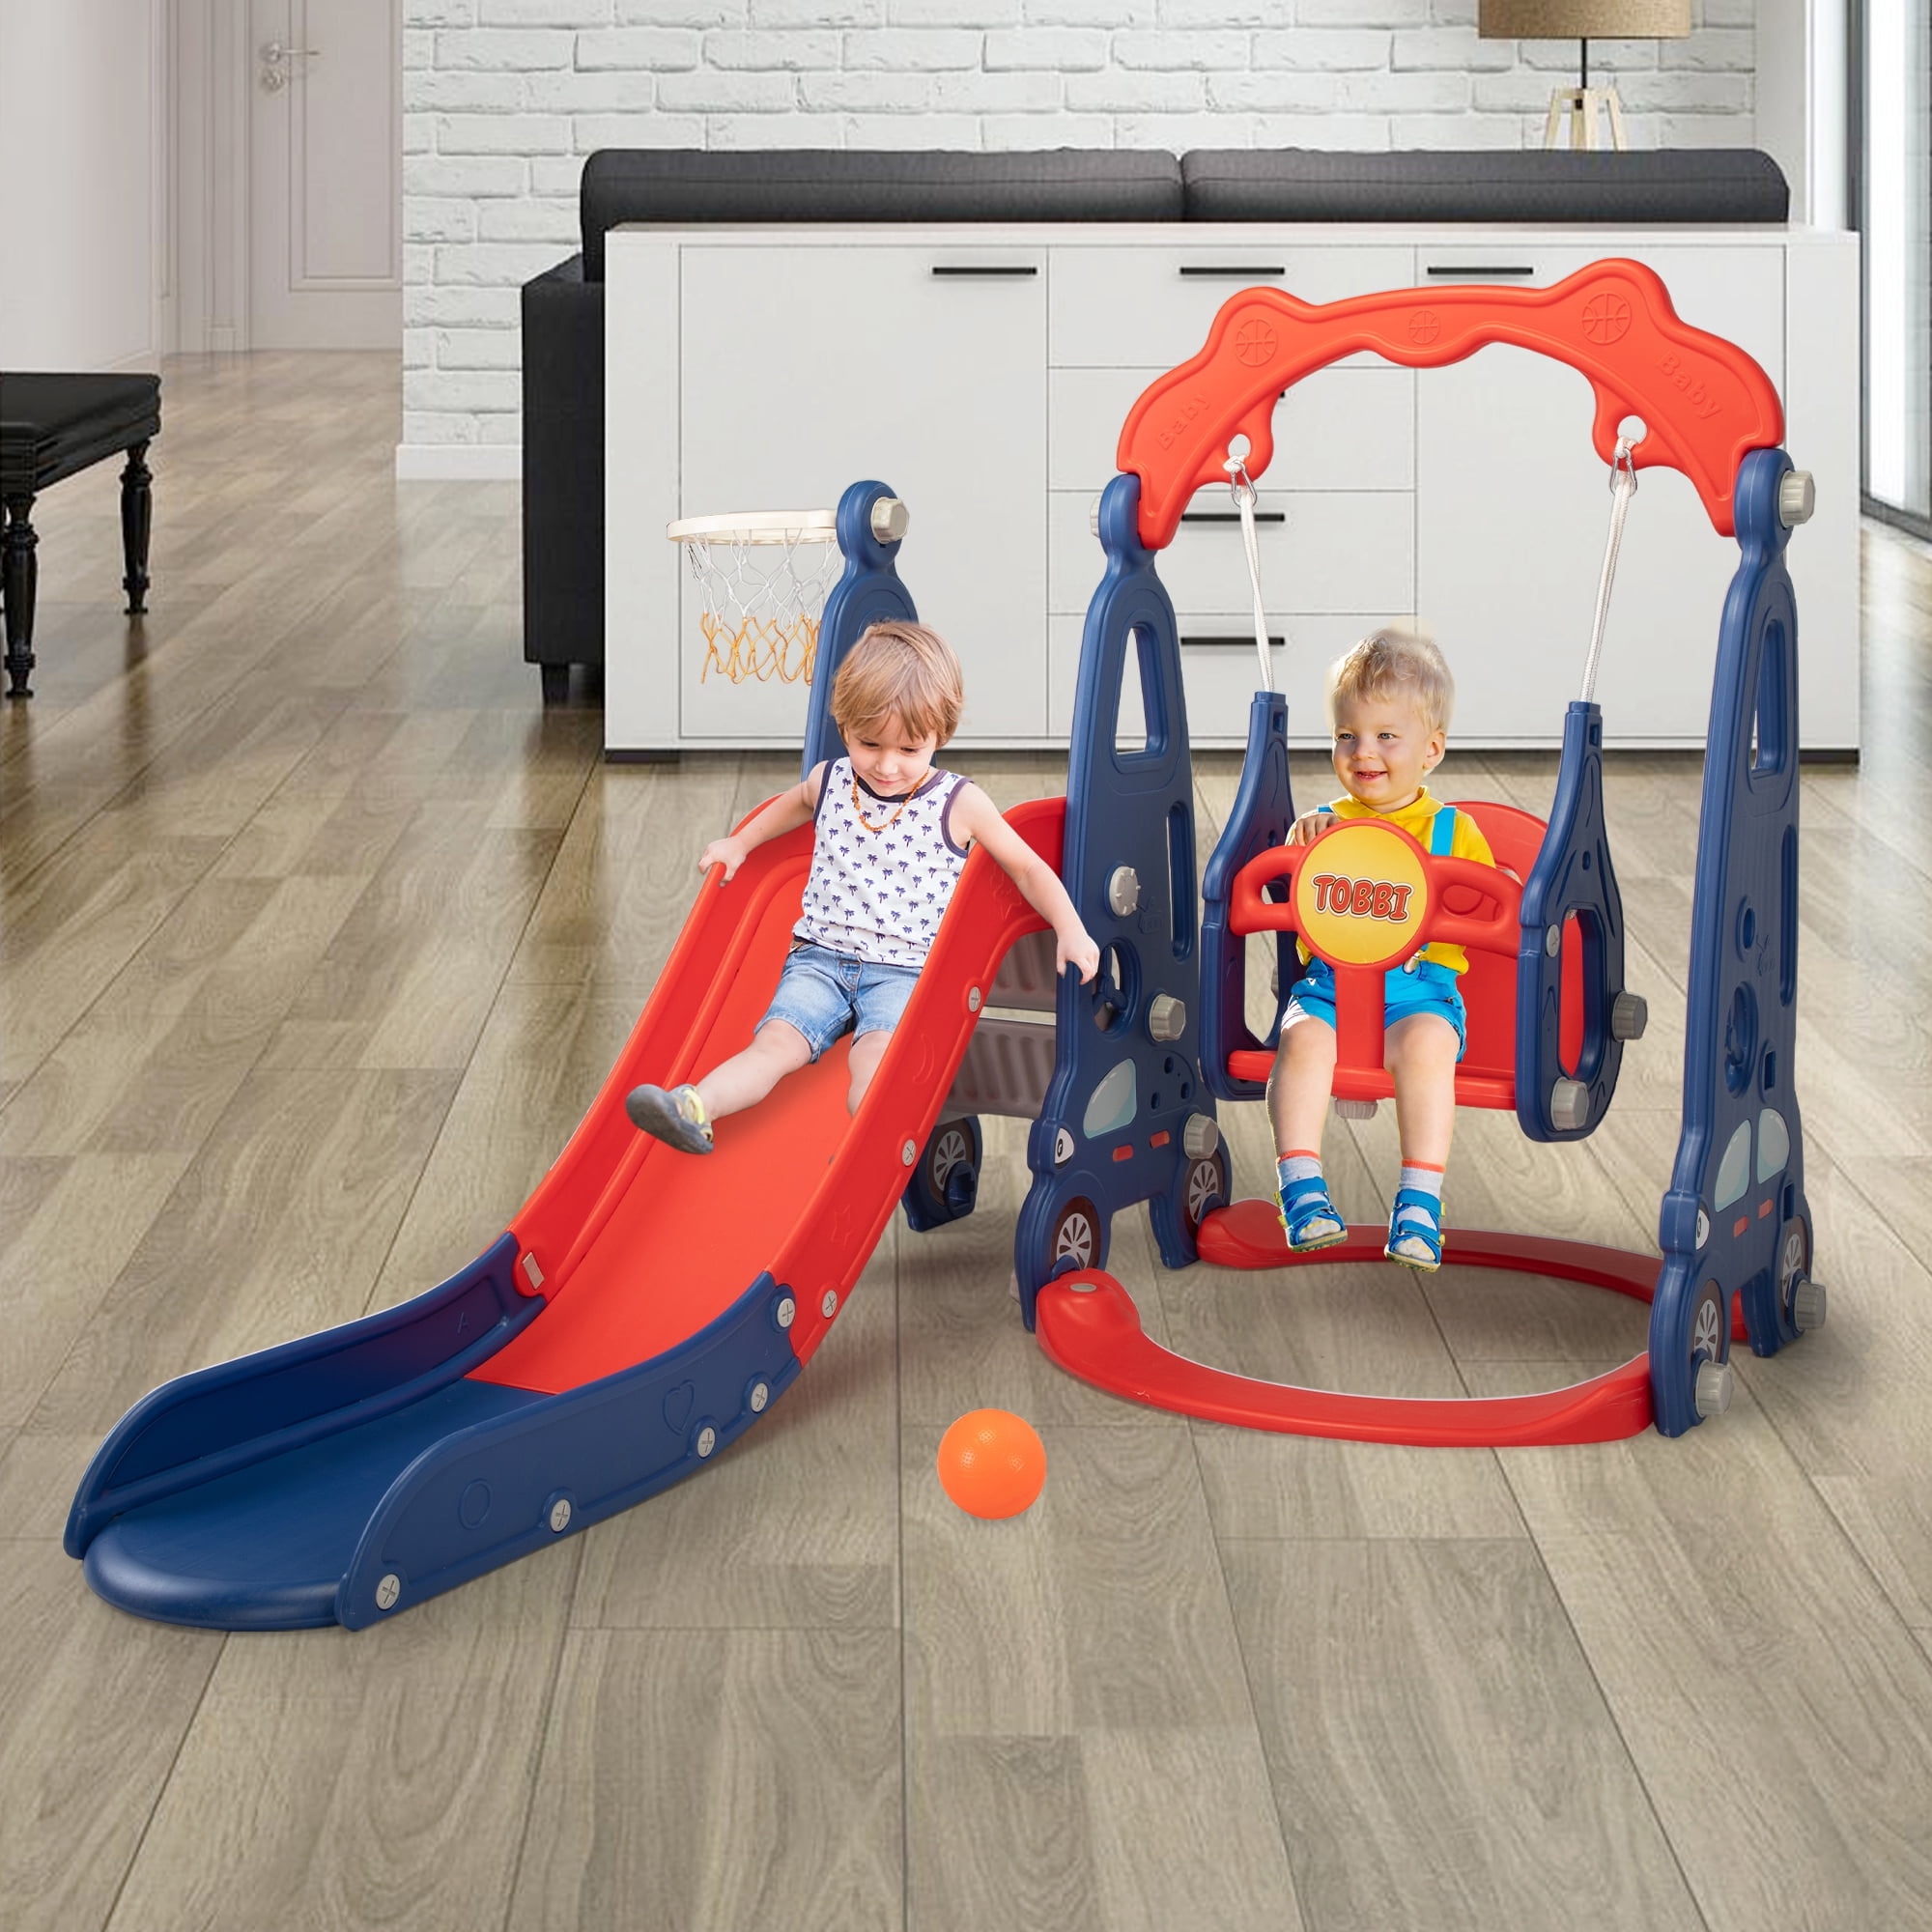 Nyeekoy 5 In 1 Toddler Slide And Swing Set, Toddler Outdoor Playset With  Football Gate, Basketball Hoops, Kids Indoor Playground Toy, Red+Blue